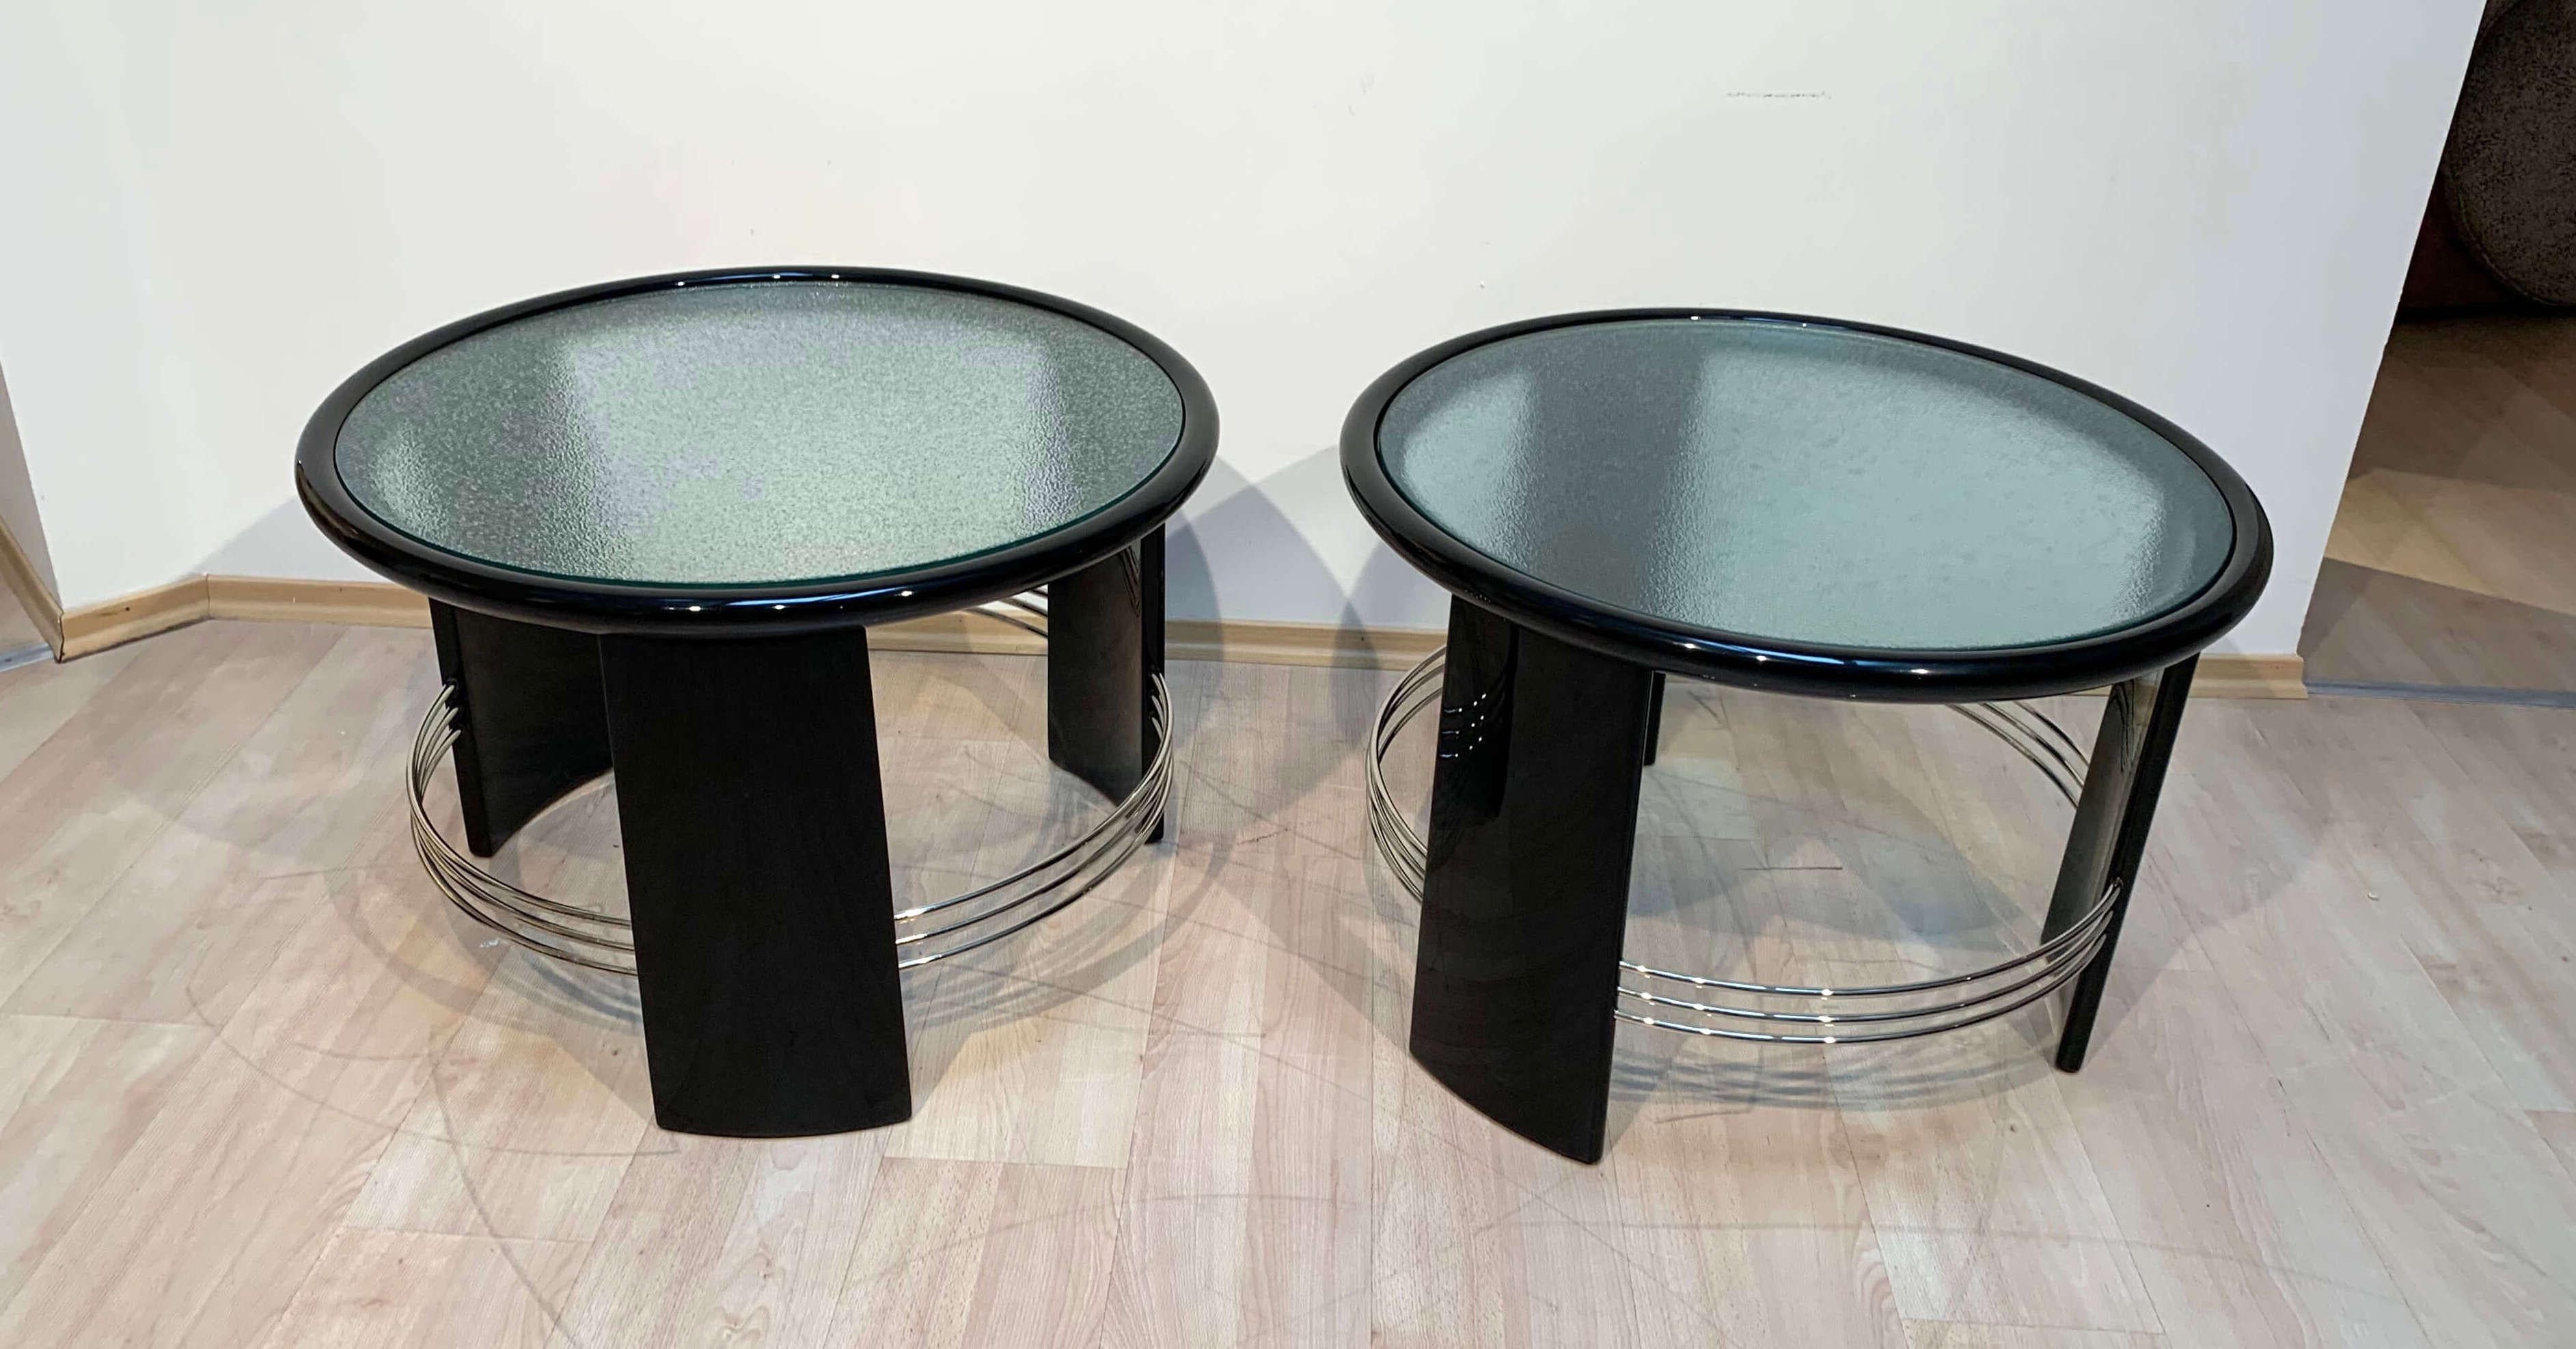 Beautiful pair of big, round and excellently restored Art Deco side, sofa, end or coffee tables from France about 1930.
 
Black high-gloss lacquer on solid oak wood. Old frosted glass to take out. Nickel-plated metal bars.
 
Fully restored condition.